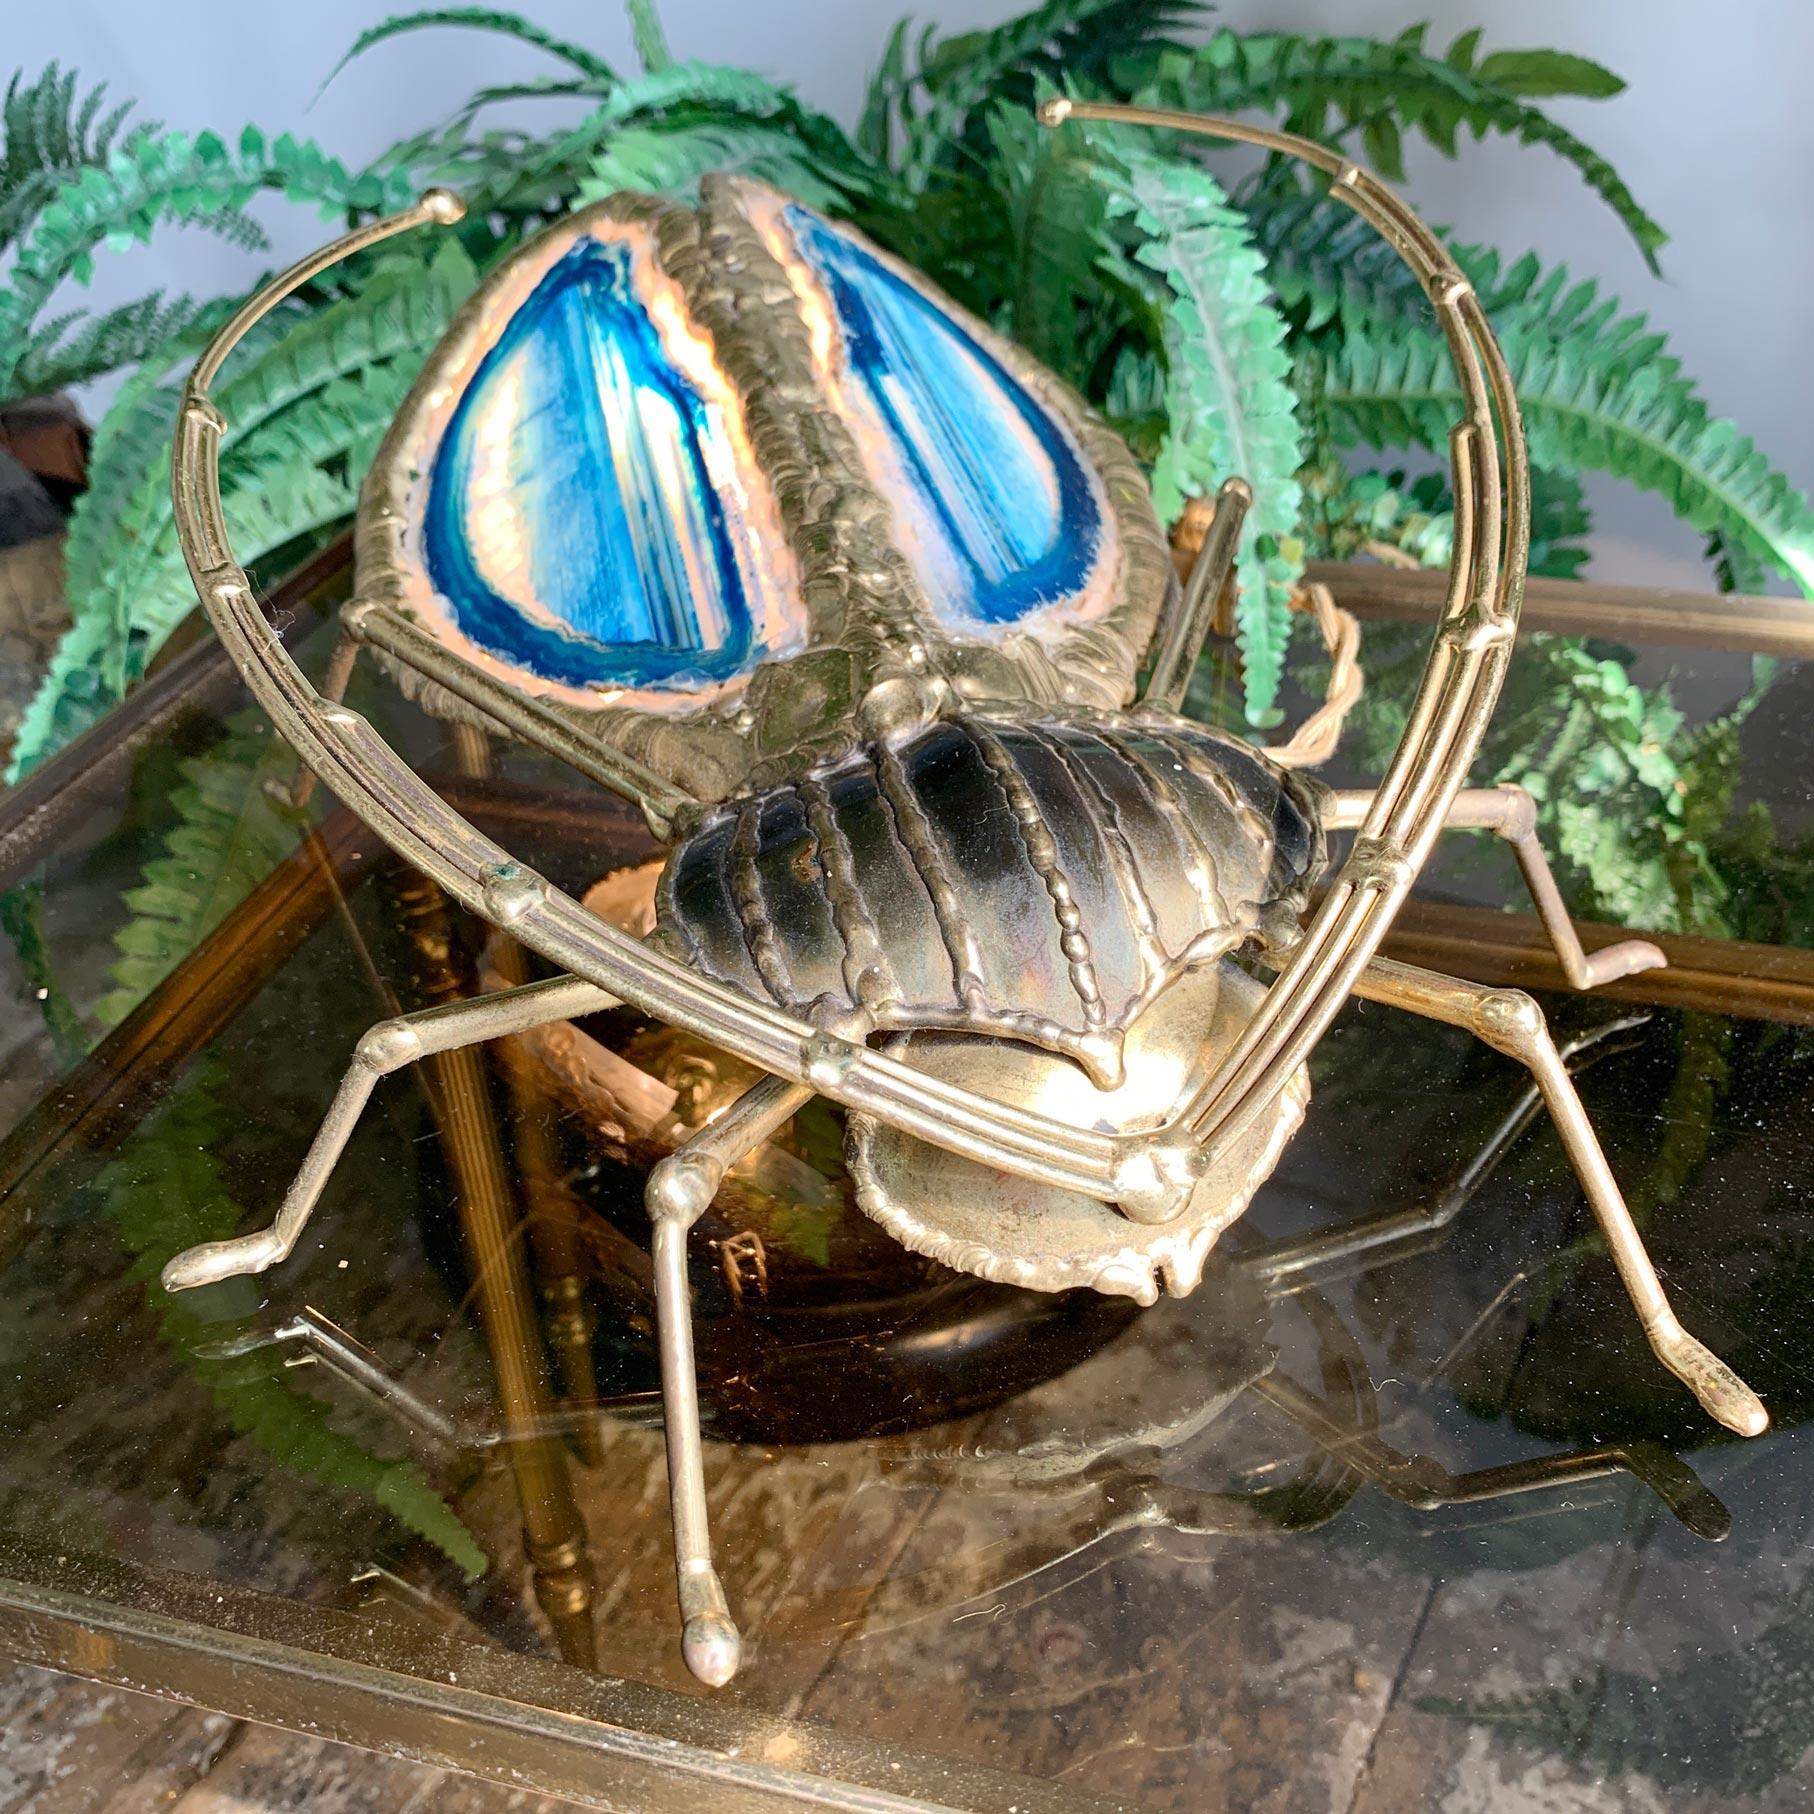 Late 20th Century Henri Fernandez Gold and Blue Illuminated Sculpture of a Longhorn Beetle For Sale